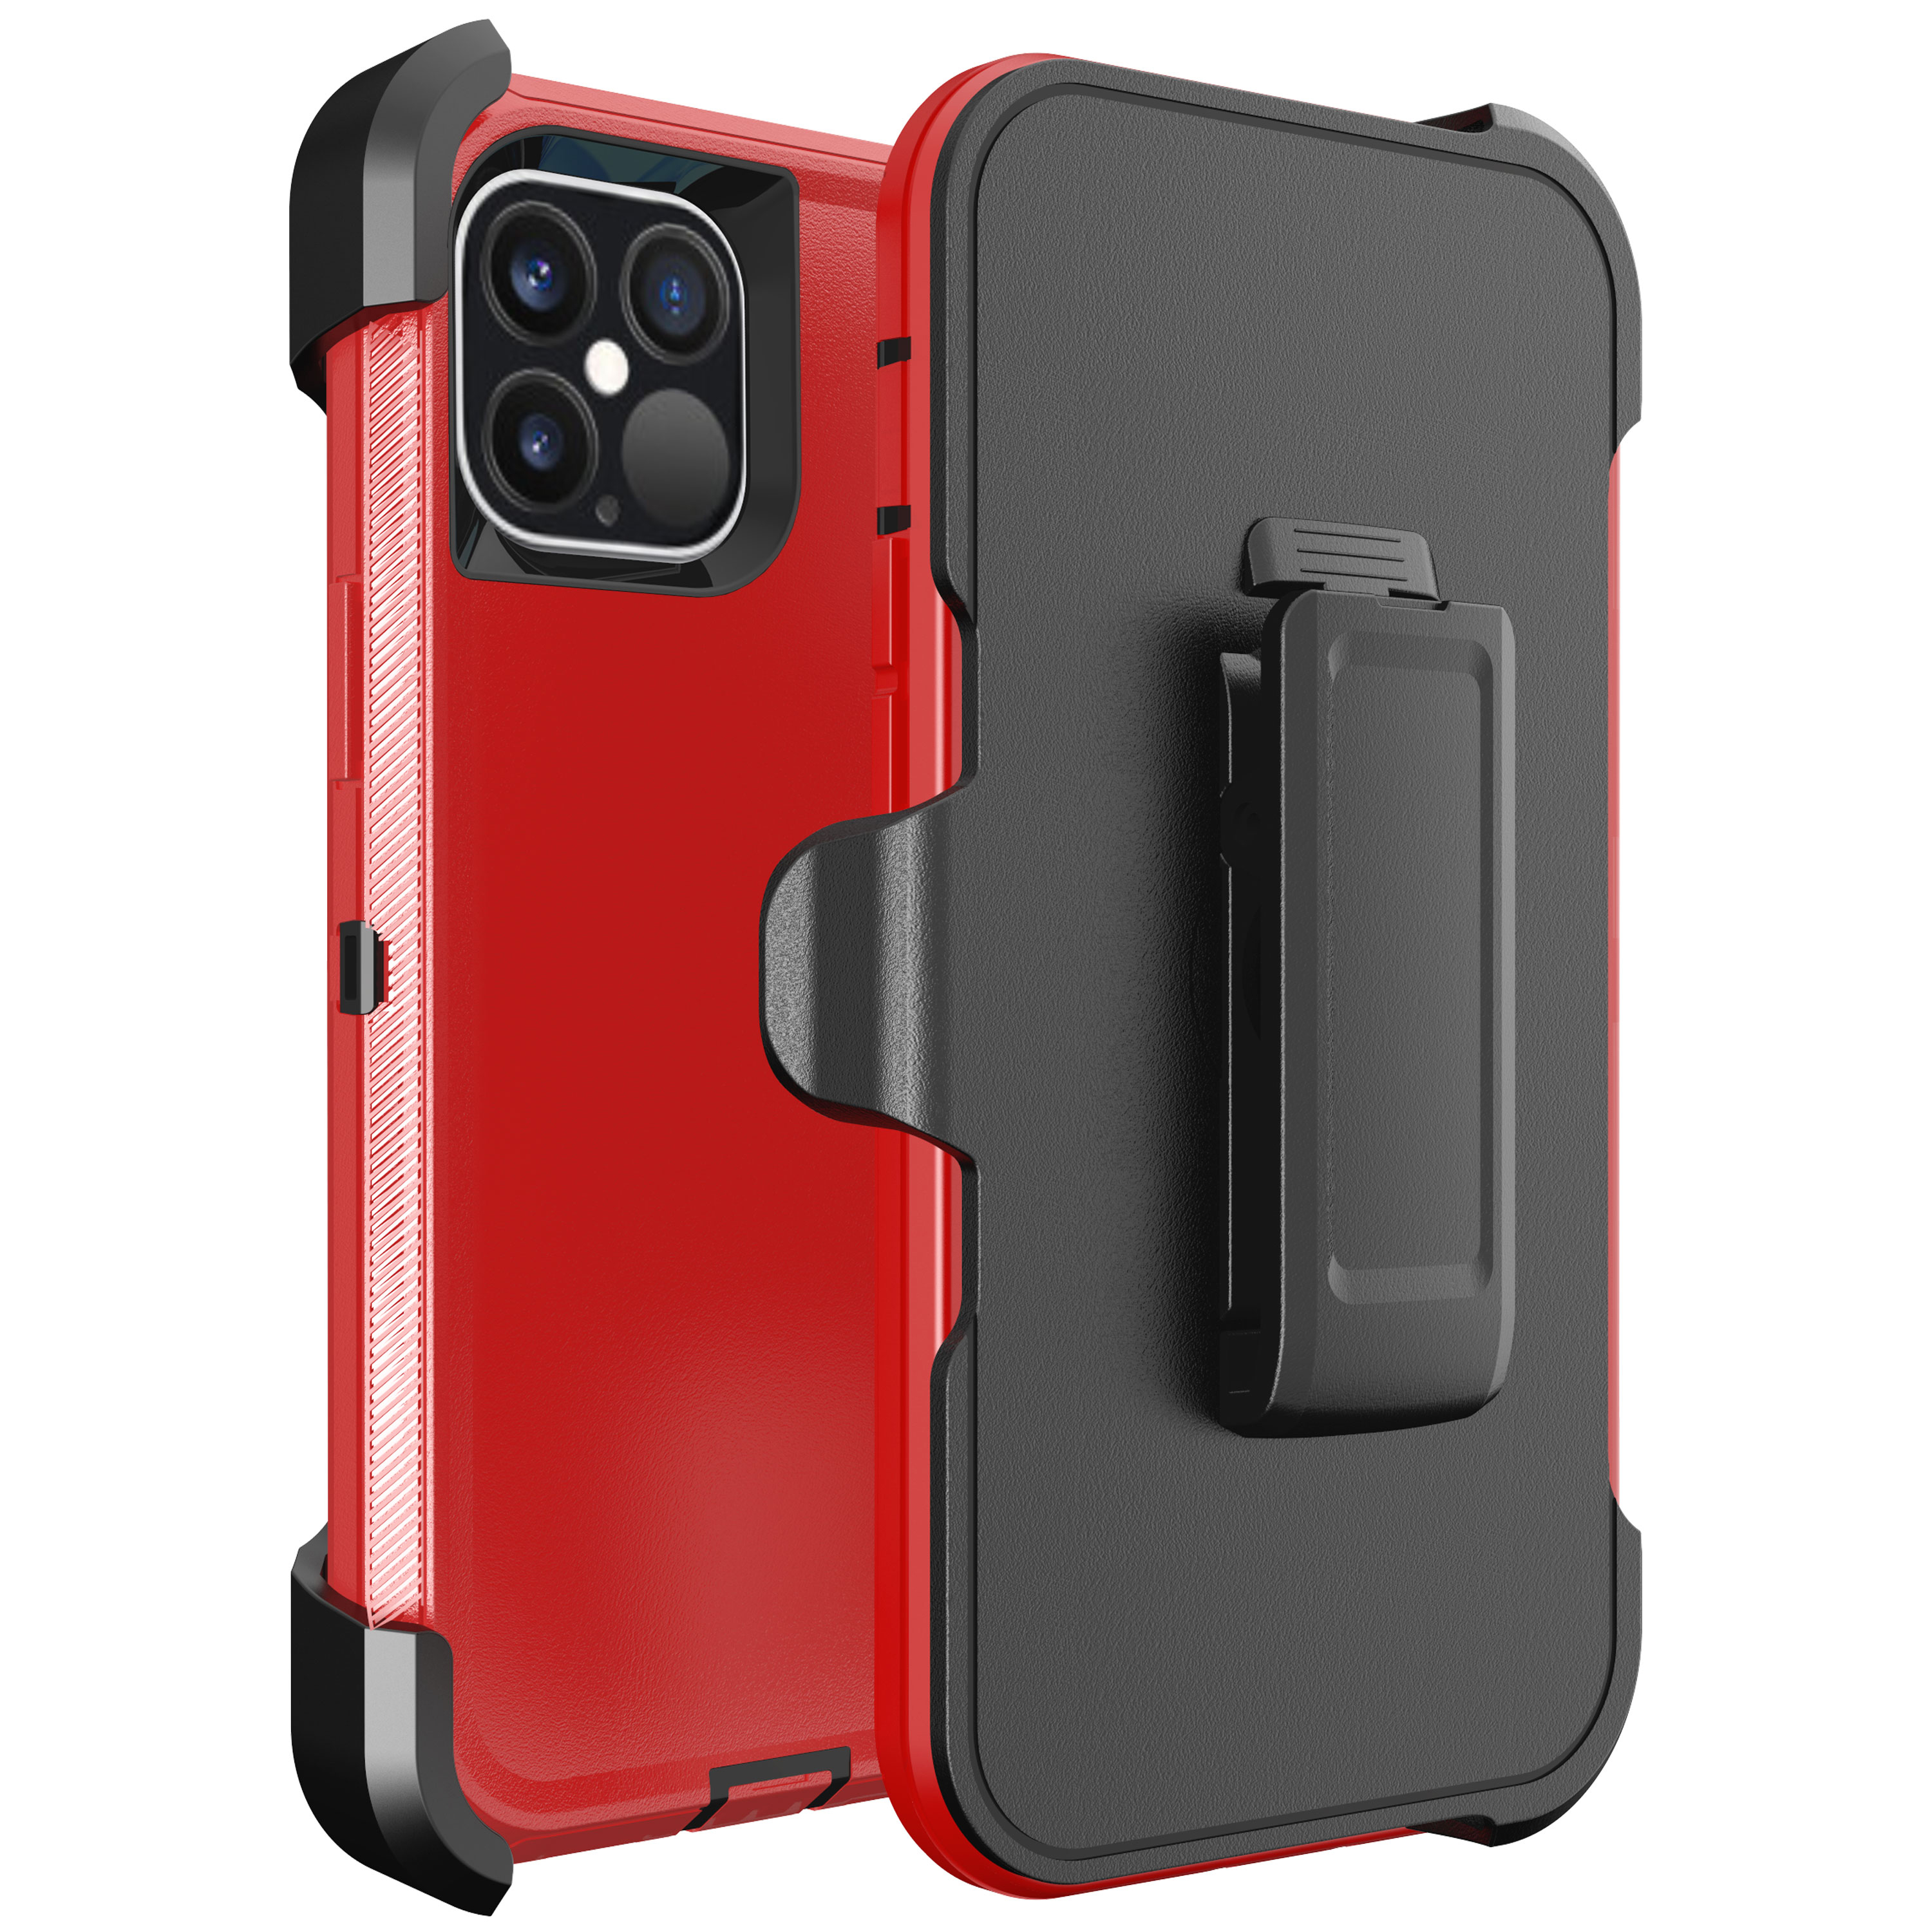 Armor Robot Case With Clip for iPHONE 12 Mini 5.4 (Red - Black)